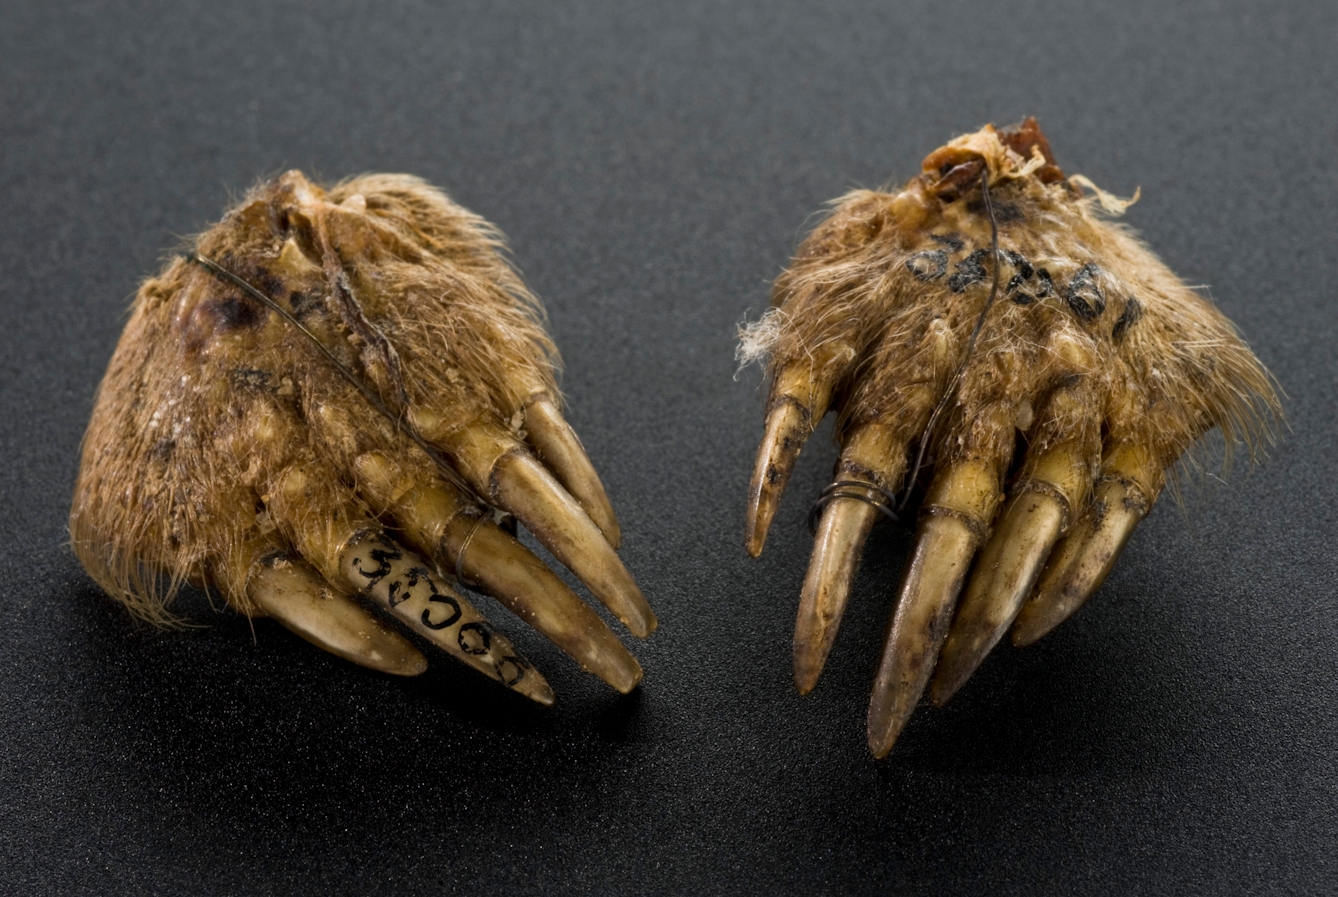 A pair of mole’s feet, detached from a mole’s body, held in place with wires